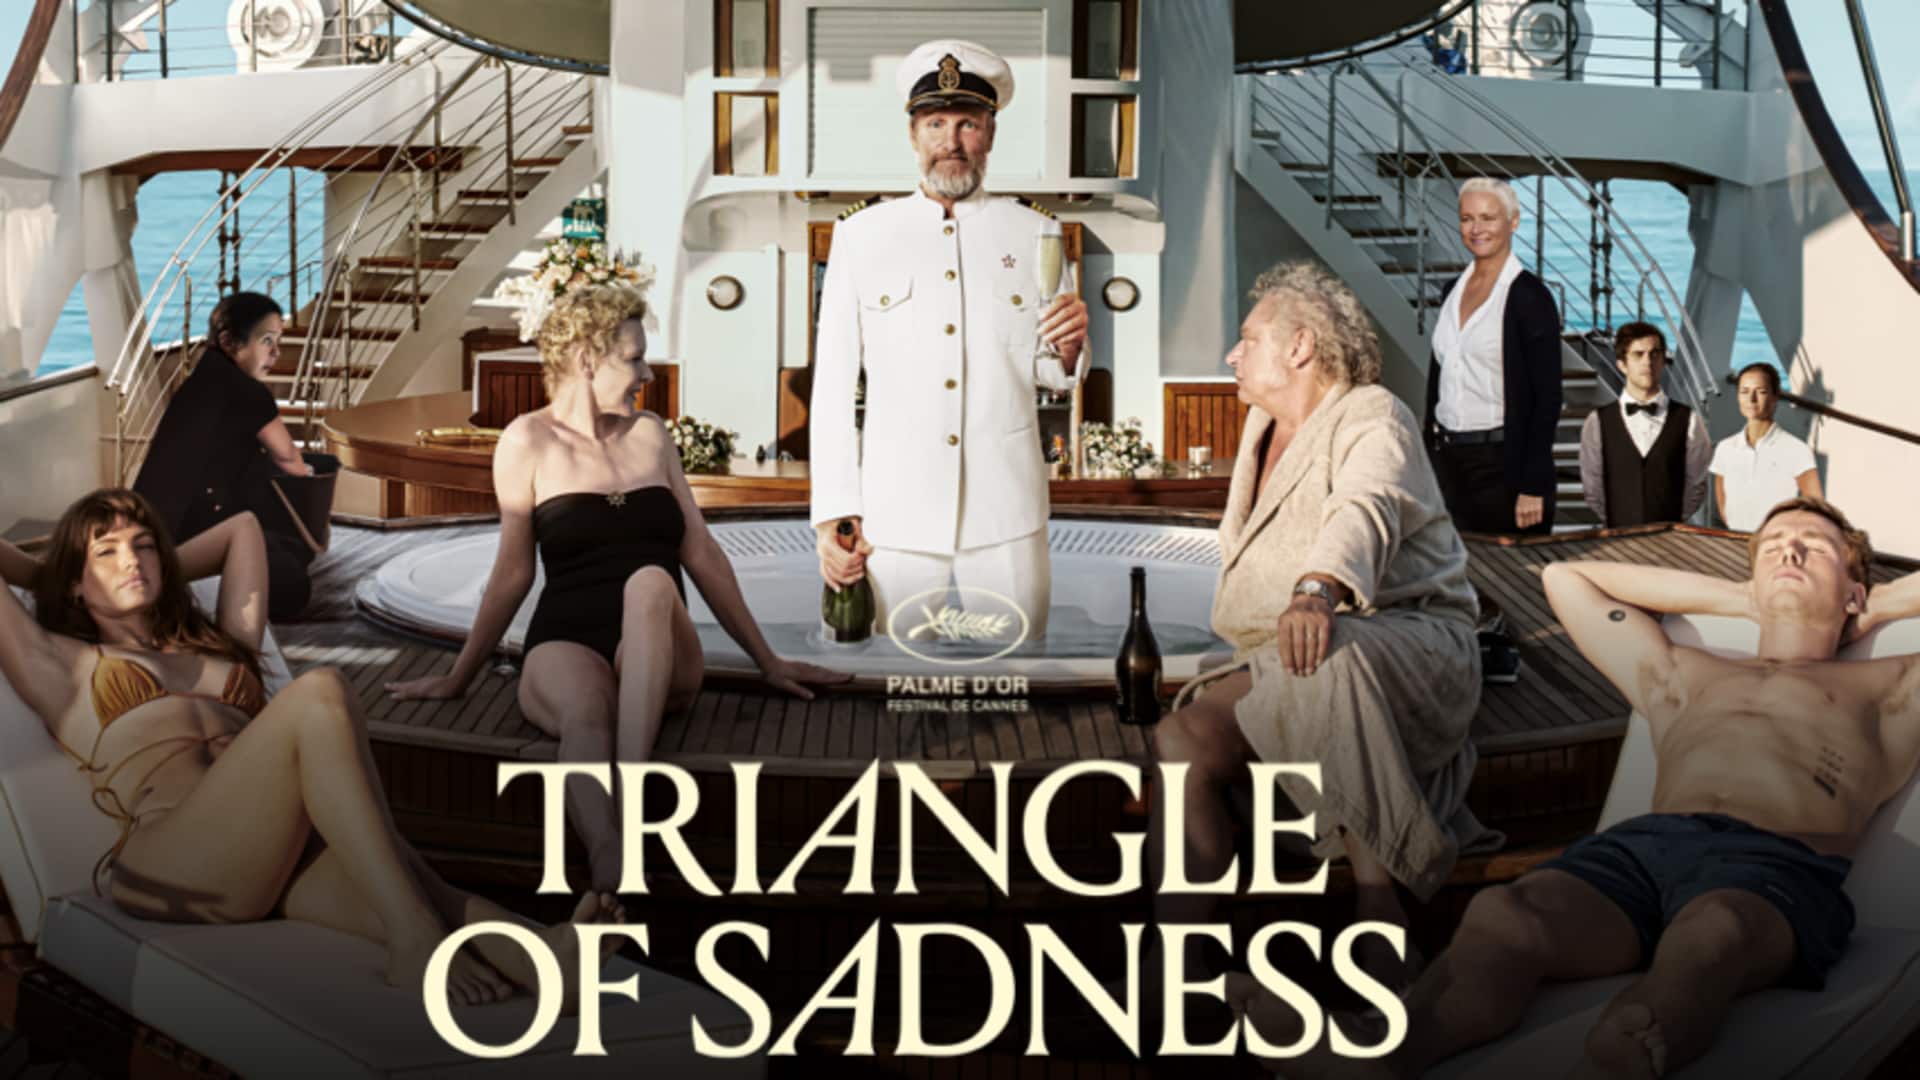 OTT: Robert Ostlund's 'Triangle of Sadness' is streaming now